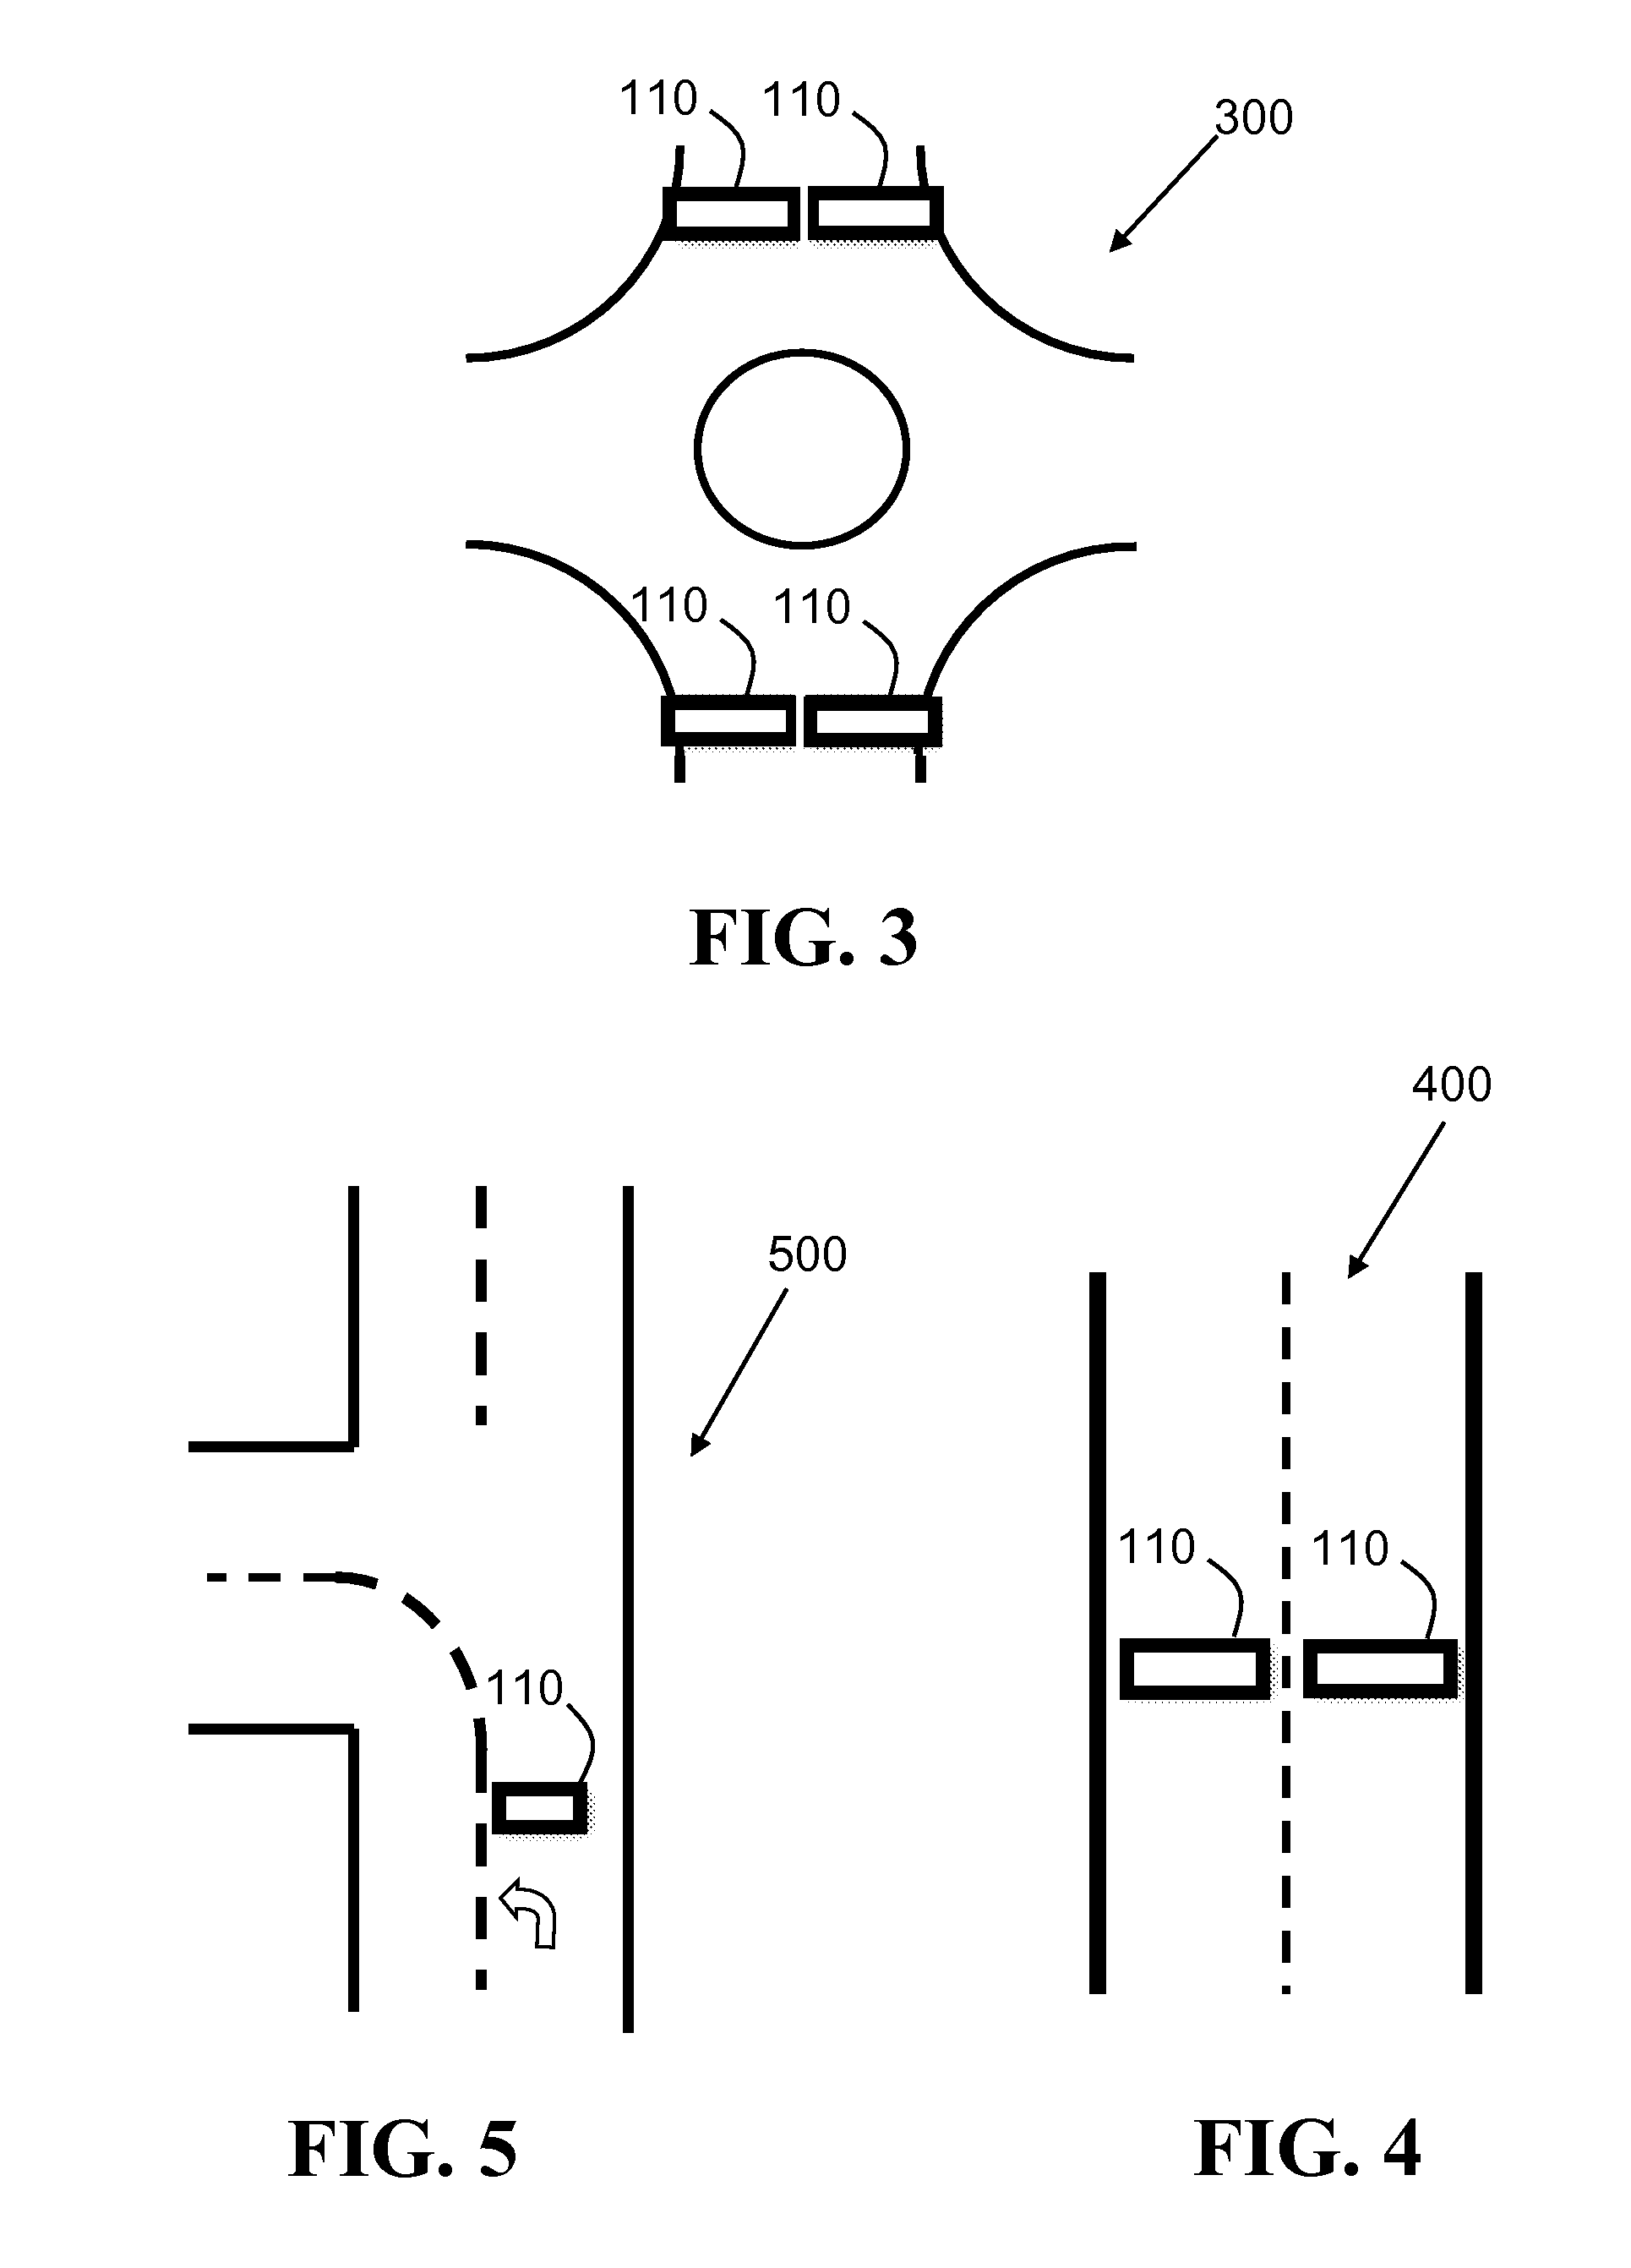 Vehicular Movement Electricity Converter Embedded Within A Road Bumb